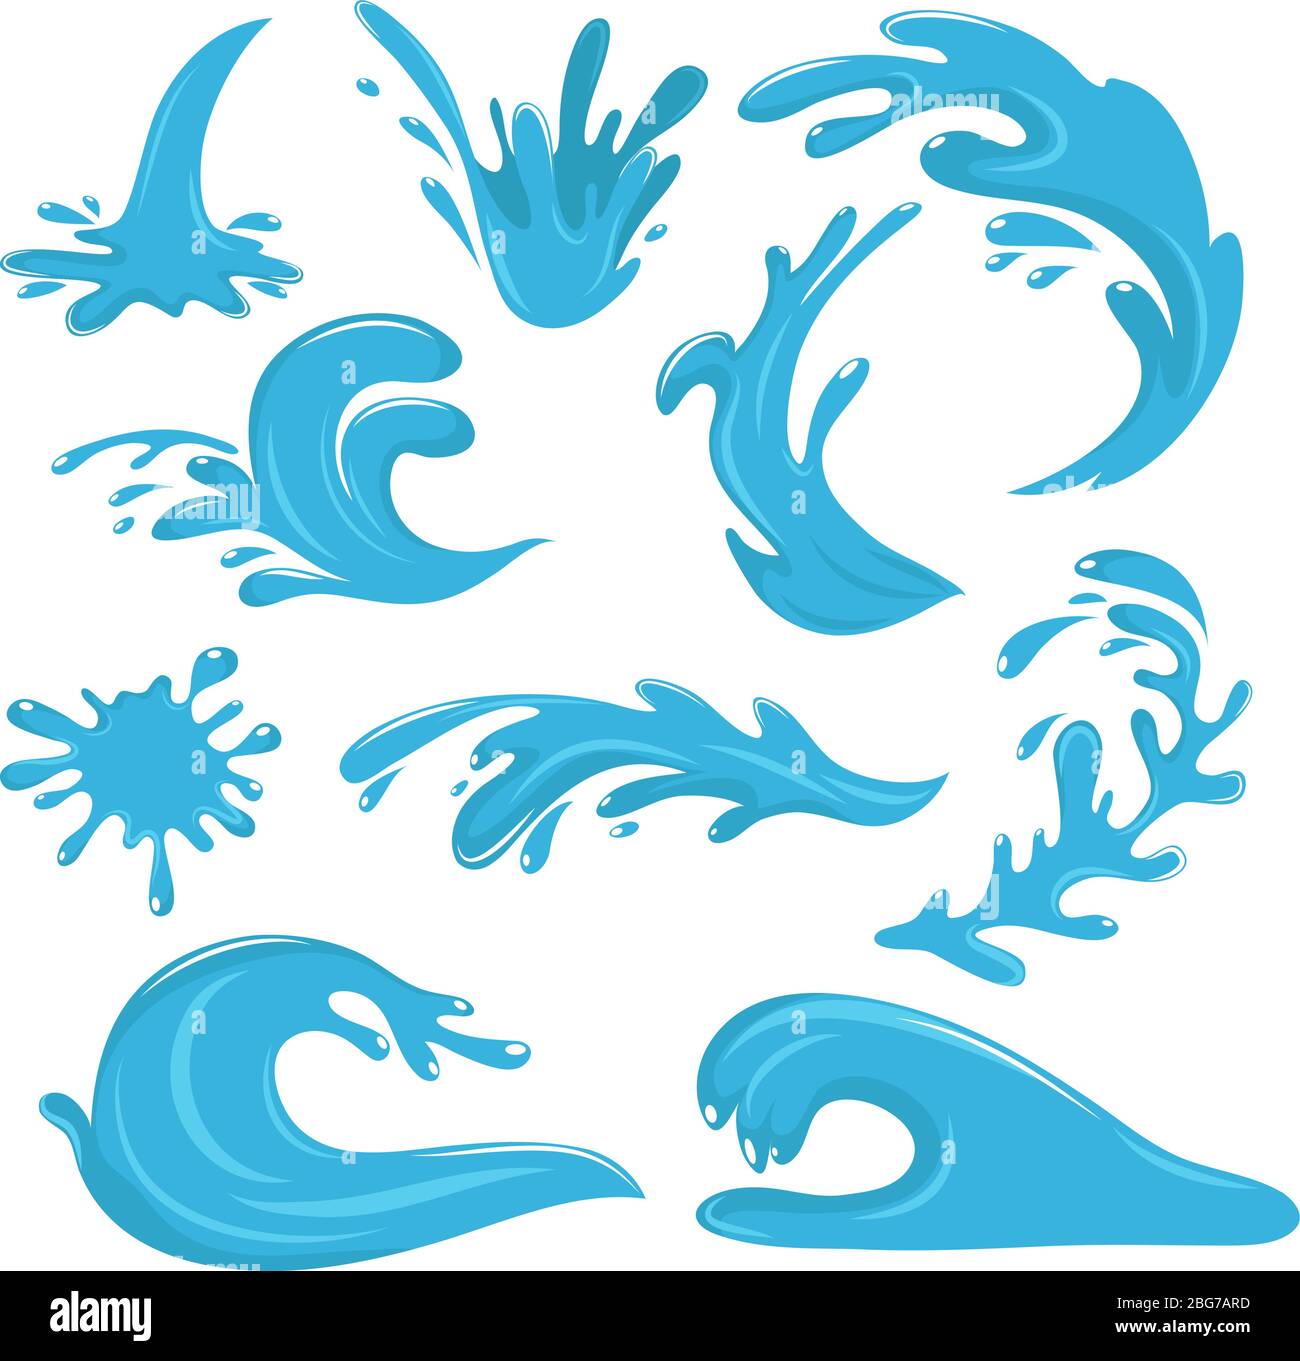 Water drops and blue splashes isolated on white vector set. Illustration of water splash collection Stock Vector